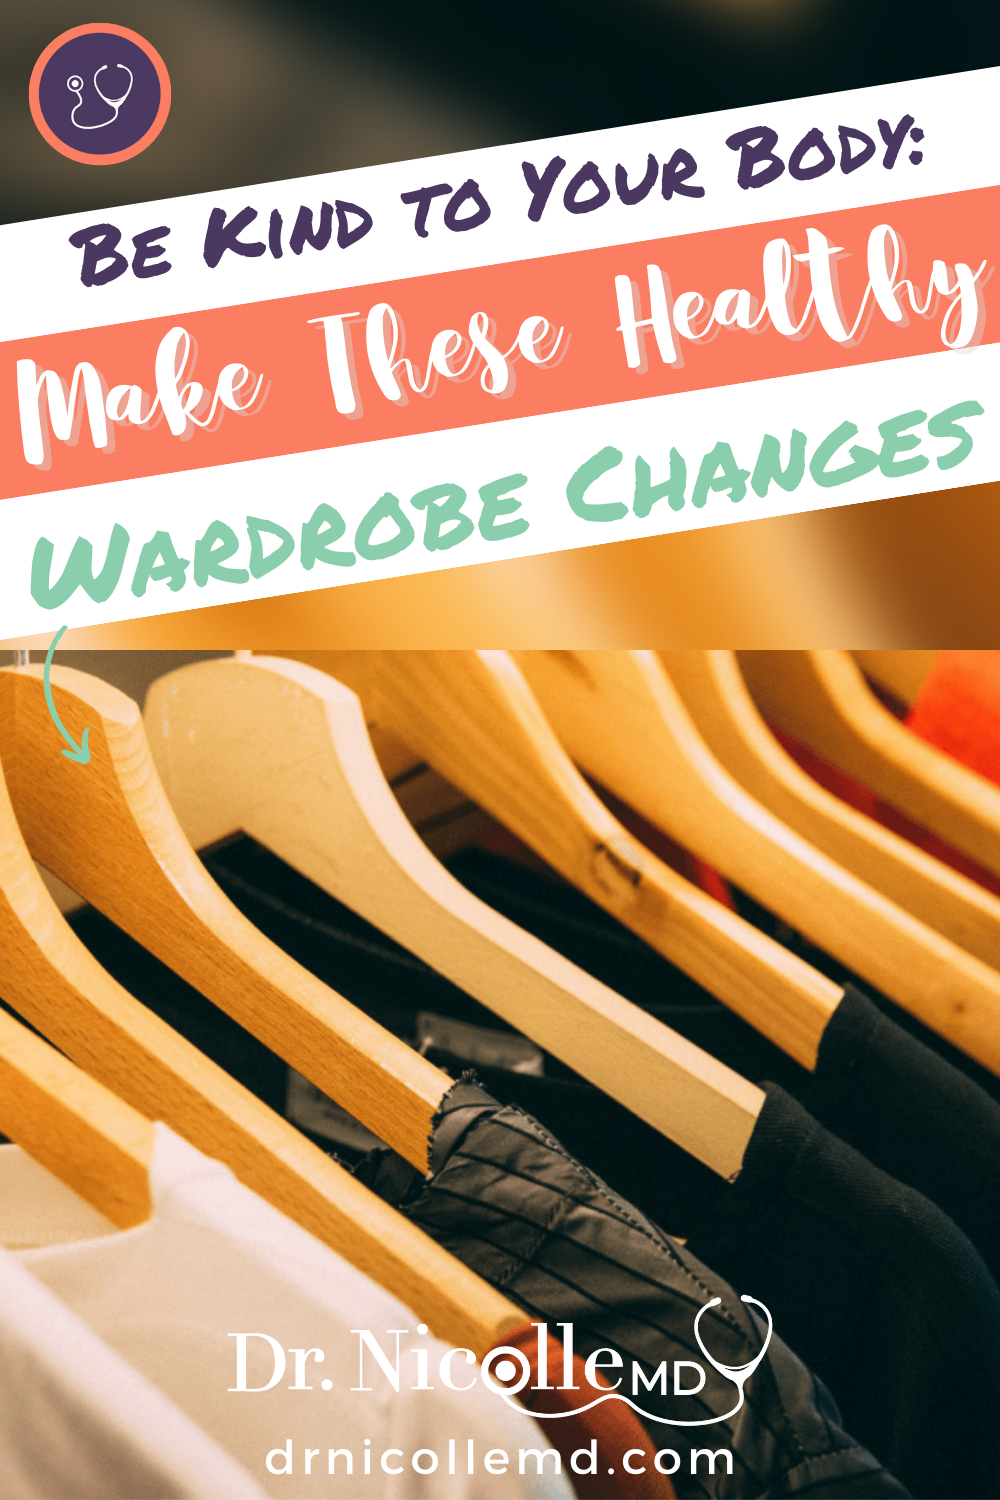 Be Kind to Your Body: Make These Healthy Wardrobe Changes